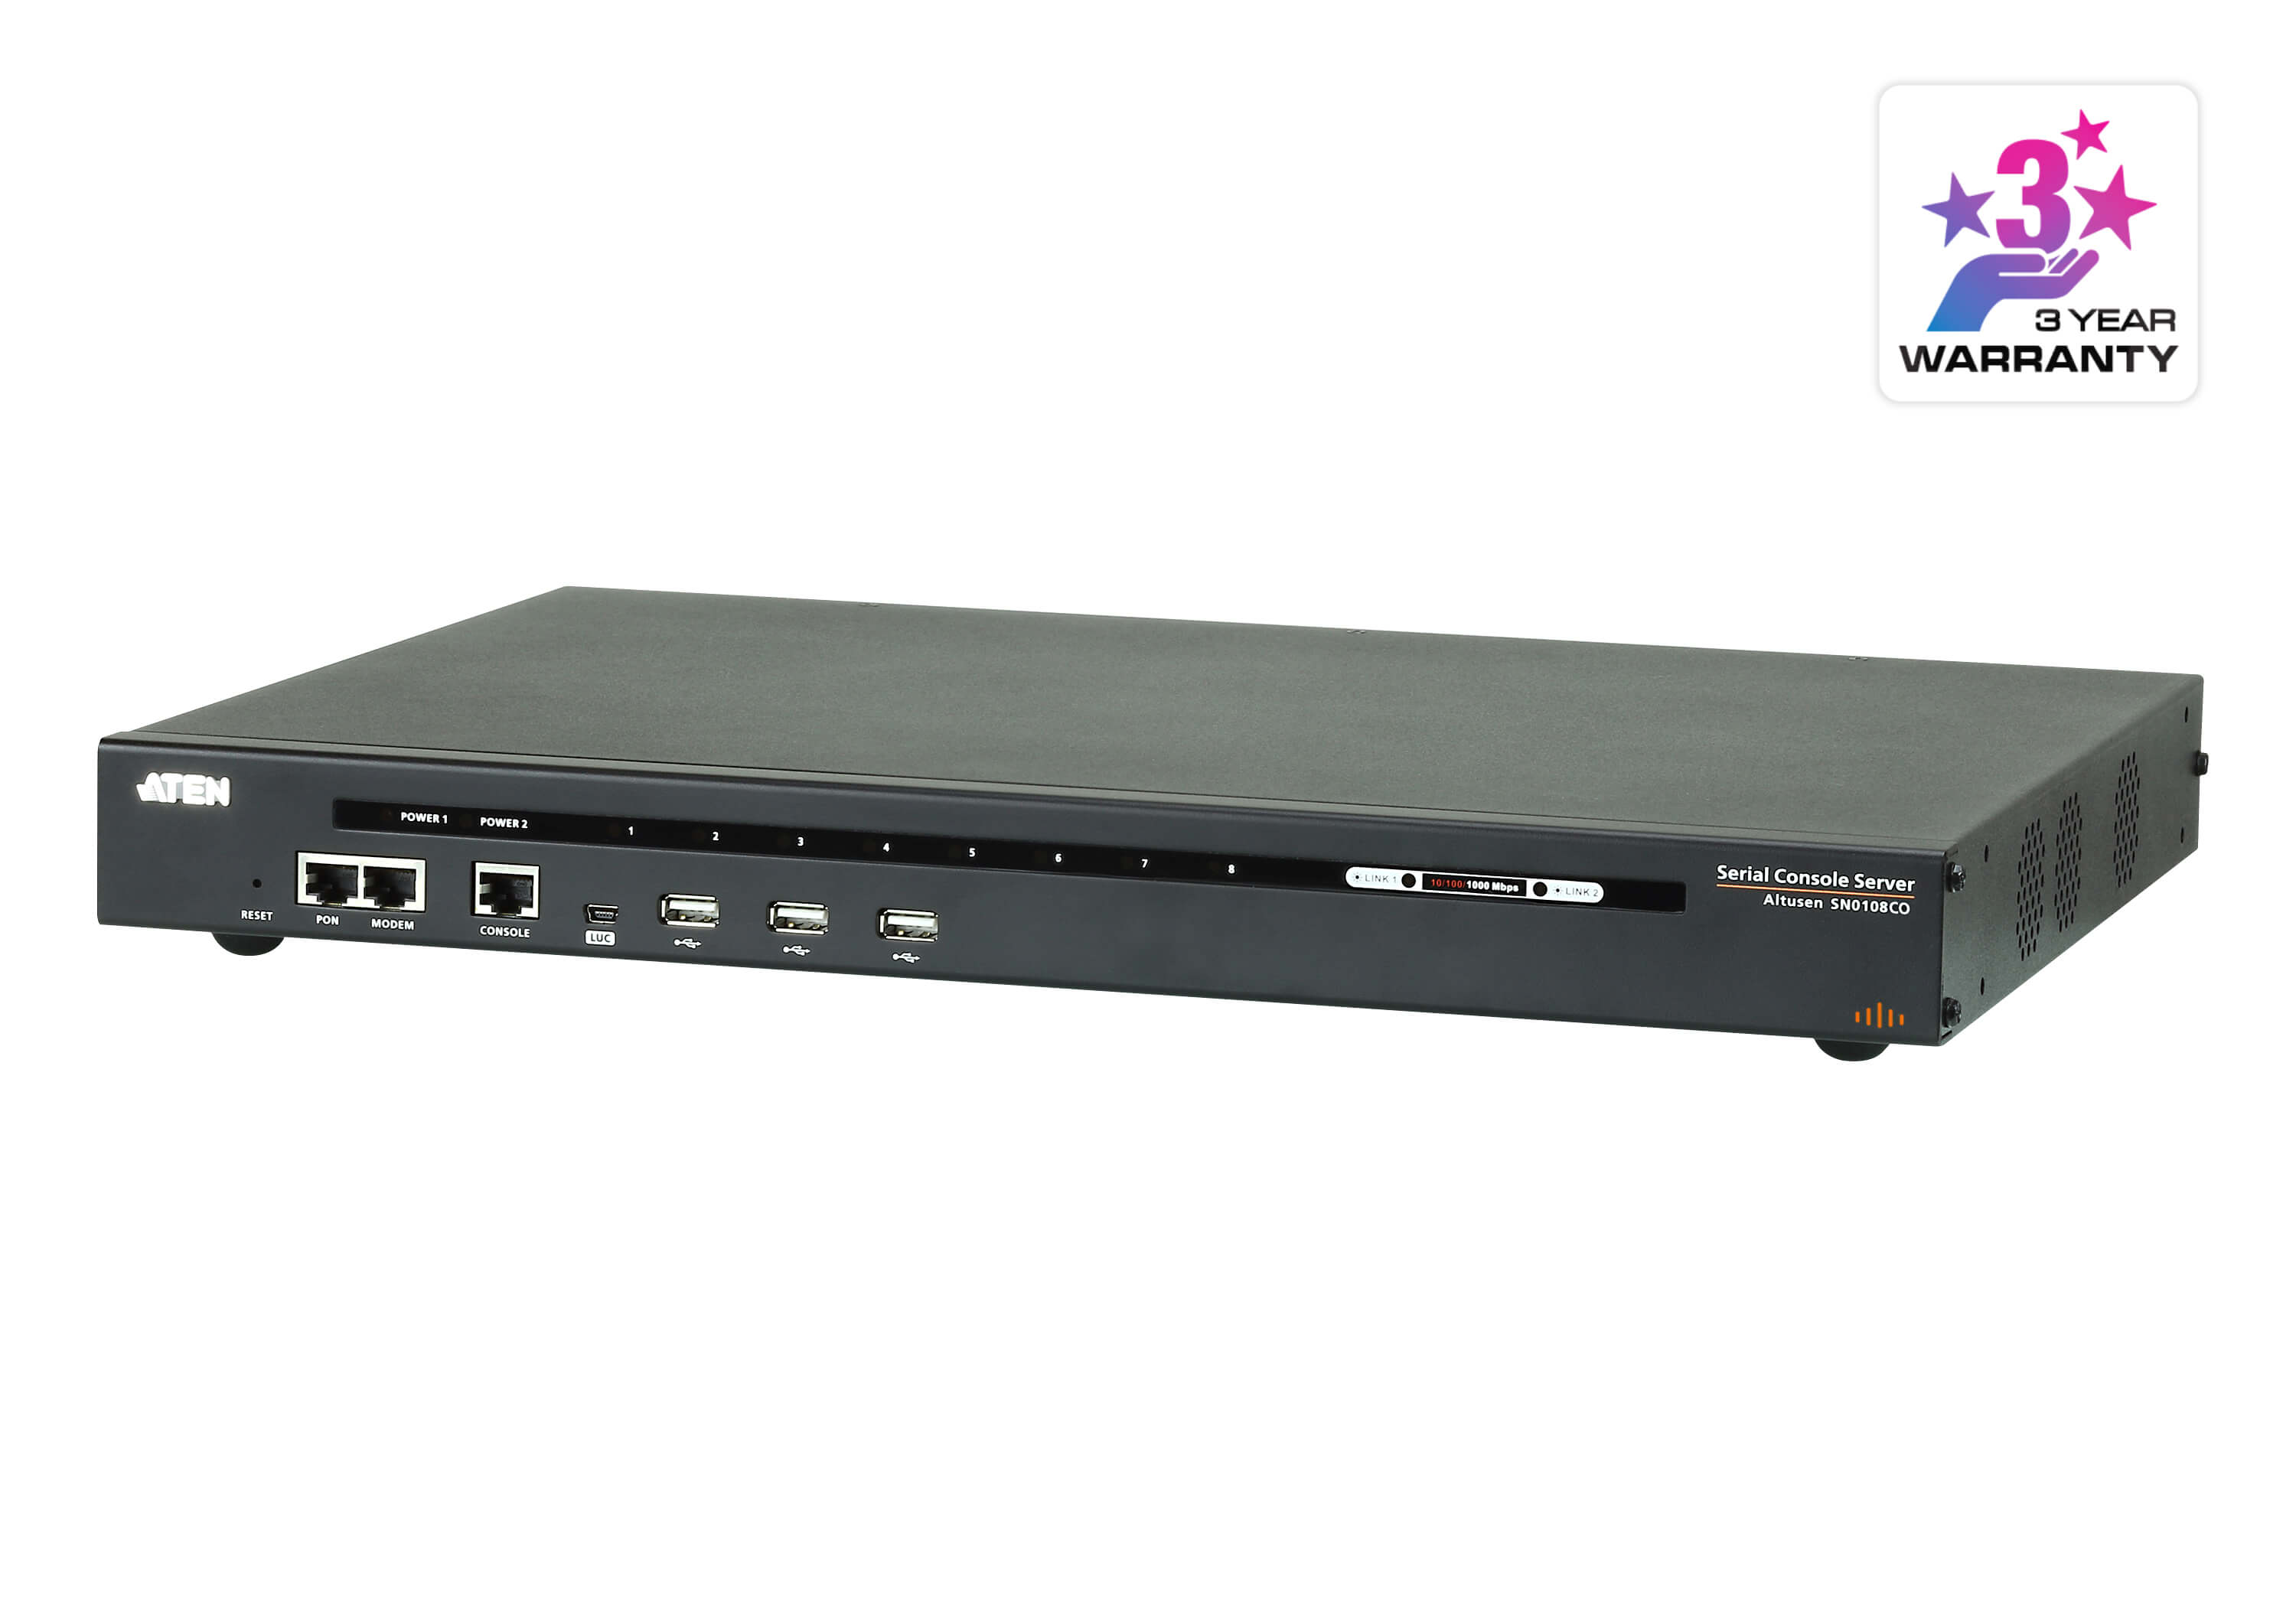 Aten 8 Port Serial Console Server over IP with dual AC Power, directly connect to Cisco switches without rollover cables, dual LAN Support